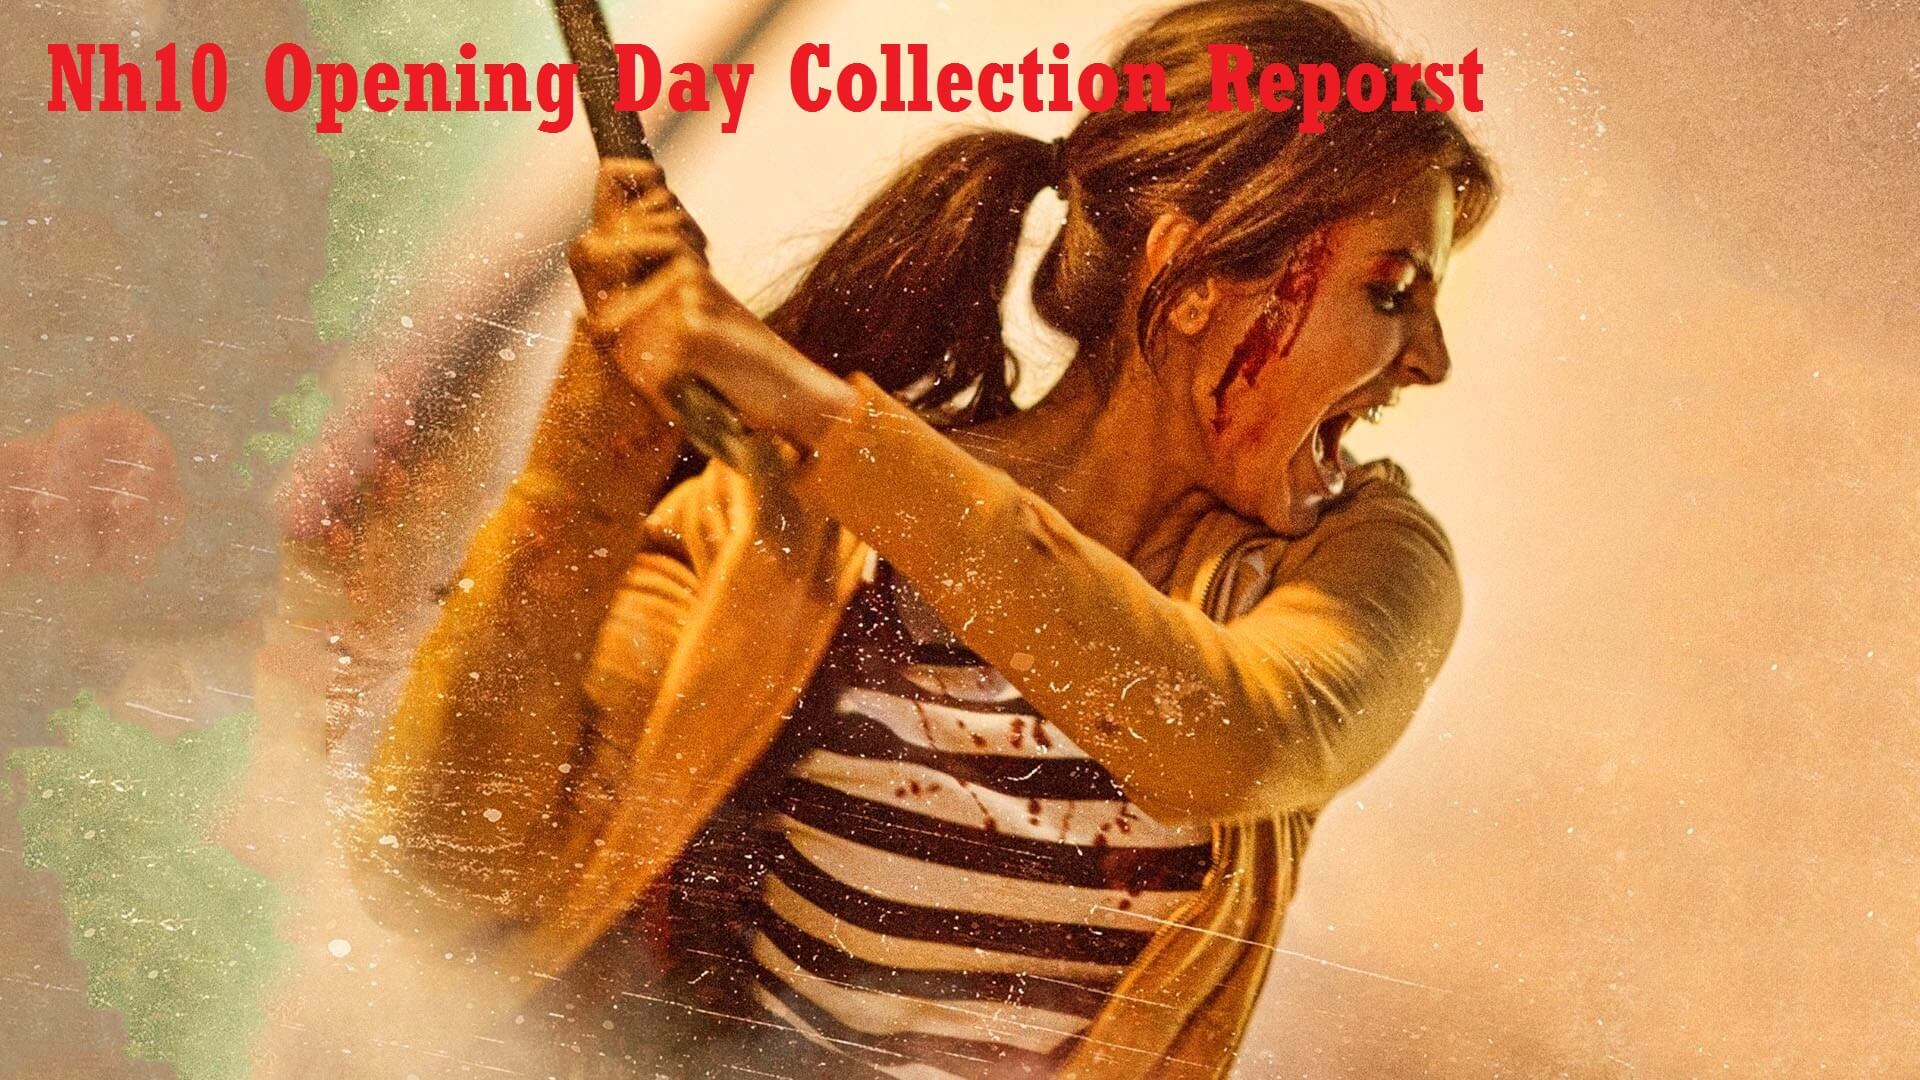 Anushka Sharma's NH10 Opening Day Box Office Collection Report